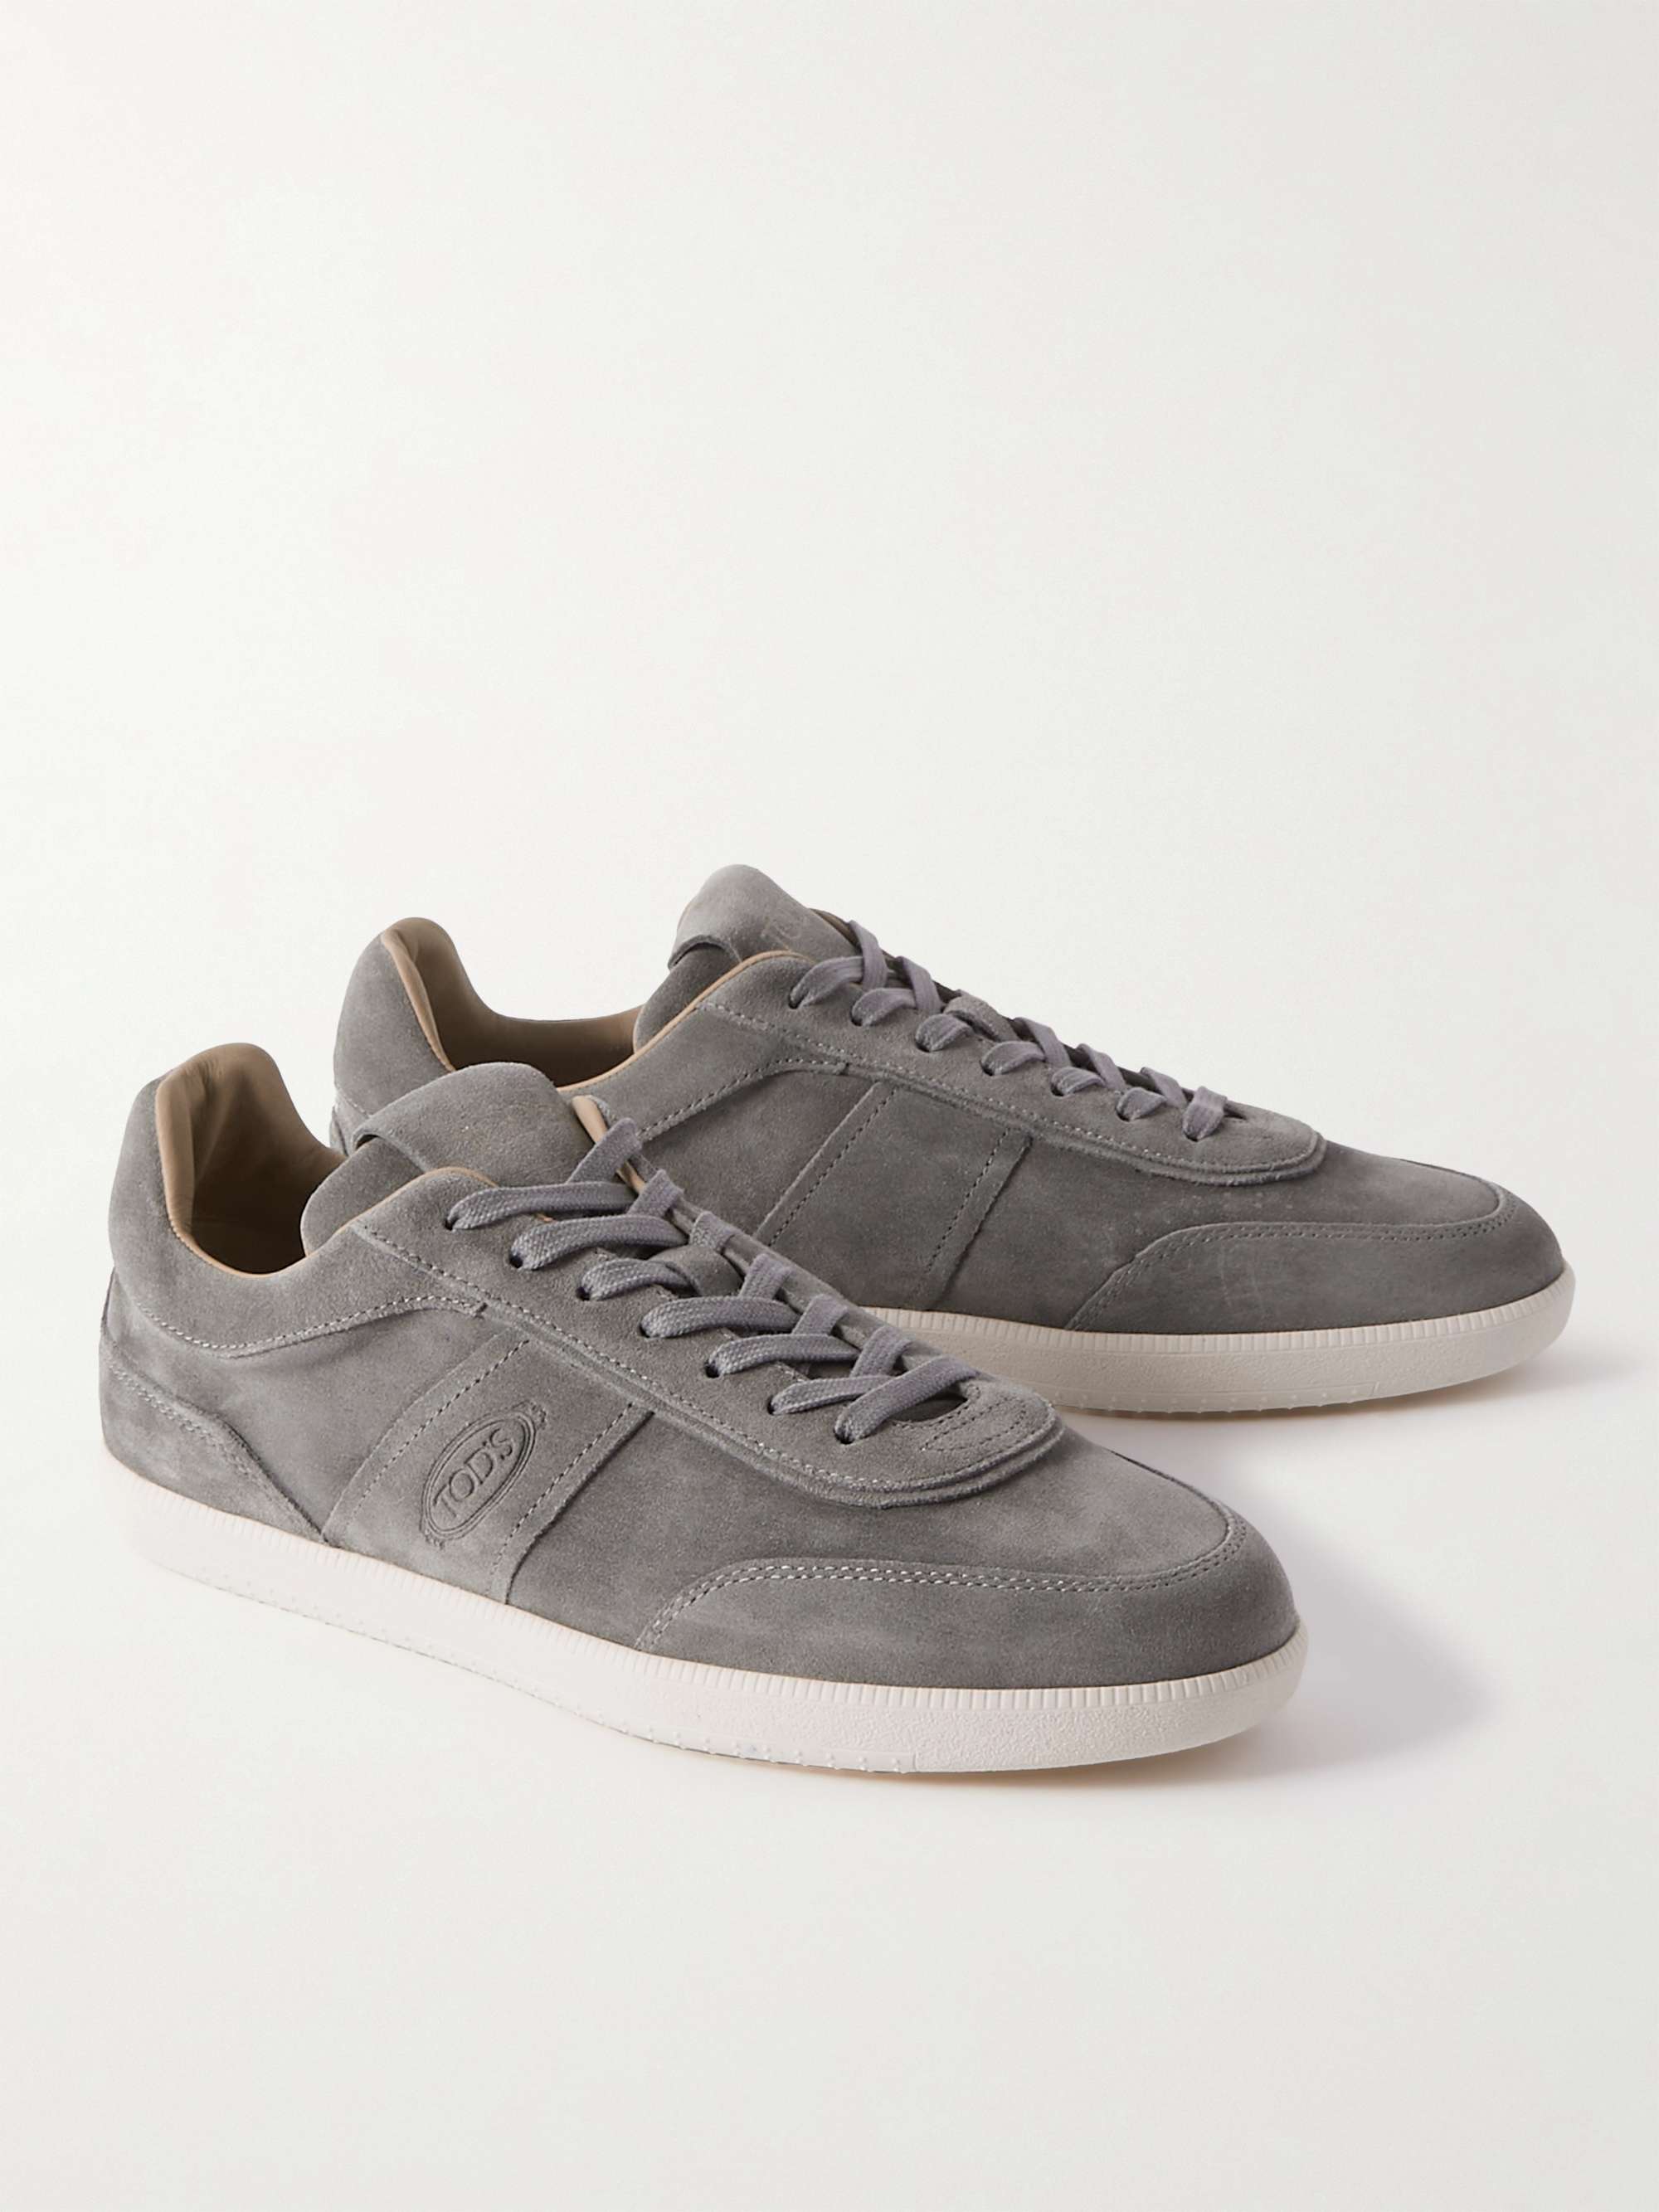 TOD'S Suede Sneakers for Men | MR PORTER